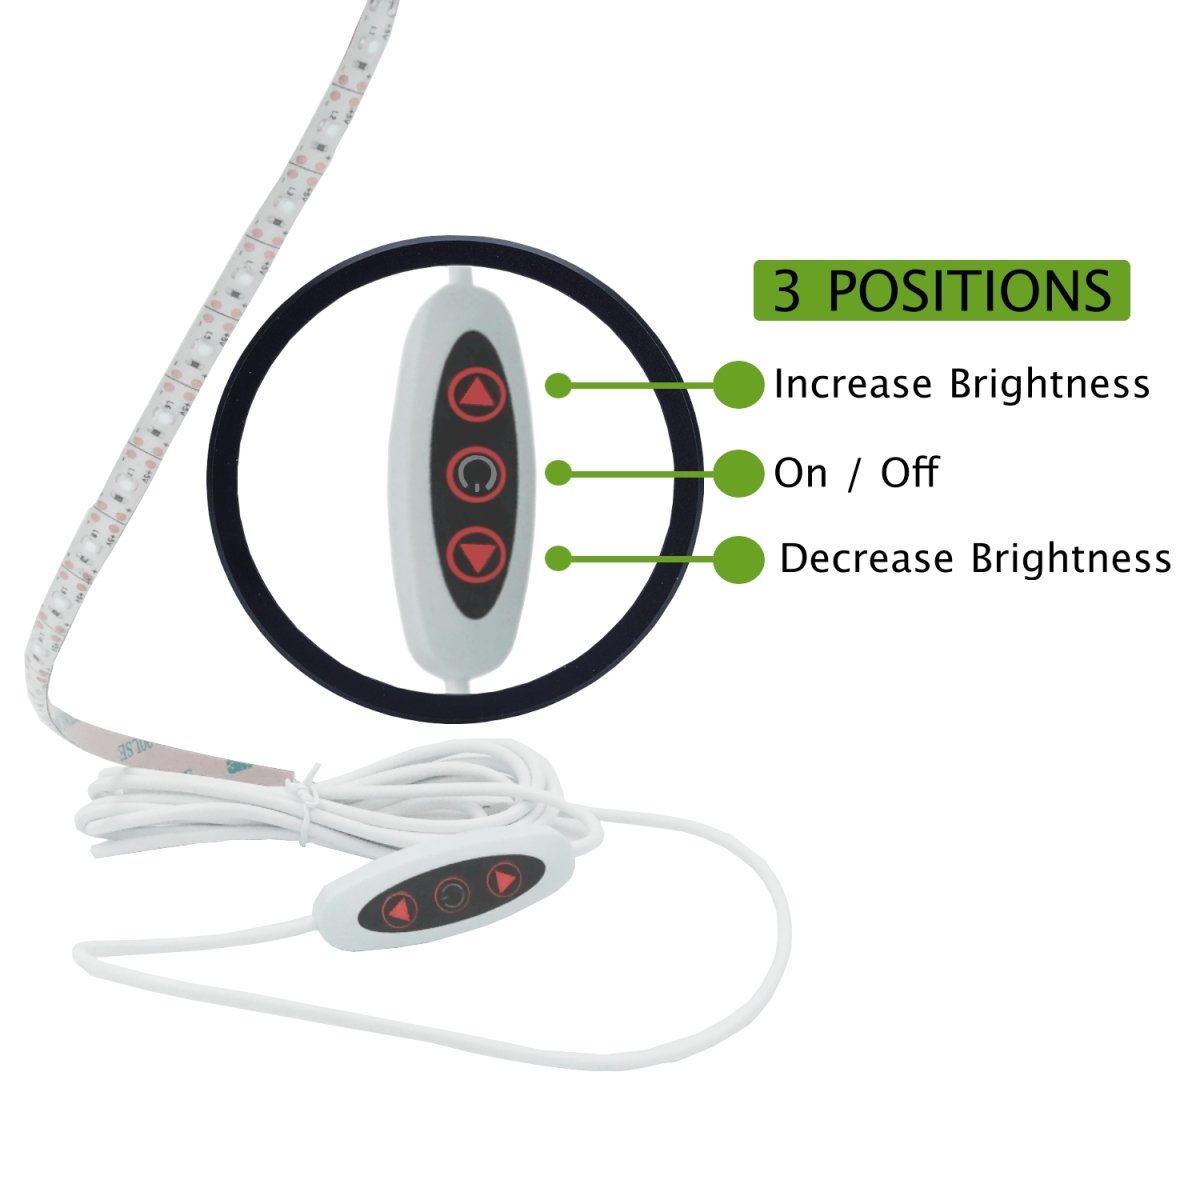 Uonlytech LED Light Strip 2 Meters Sewing Machine LED Light, USB Light Rope  LED Light Ribbon, Flexib…See more Uonlytech LED Light Strip 2 Meters